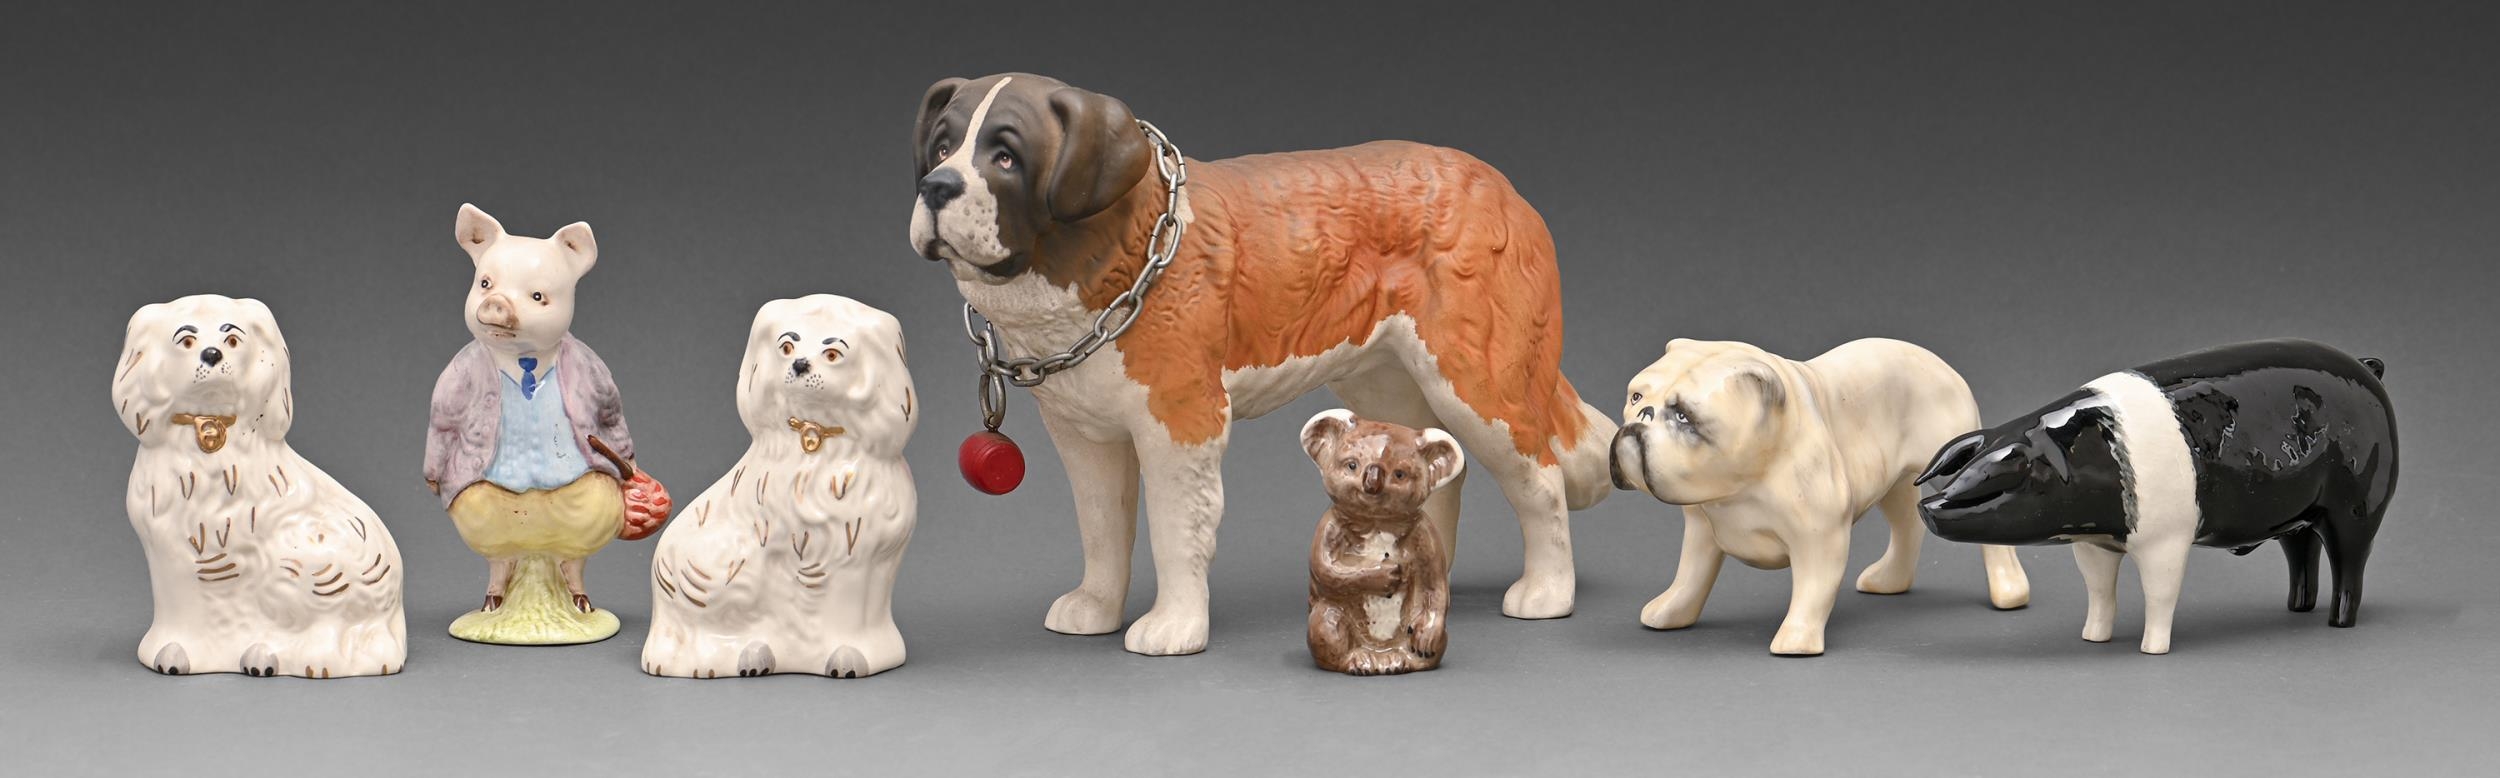 A Beswick Beatrix Potter figure of Pigling Bland, a pair of spaniels and four other animals, various